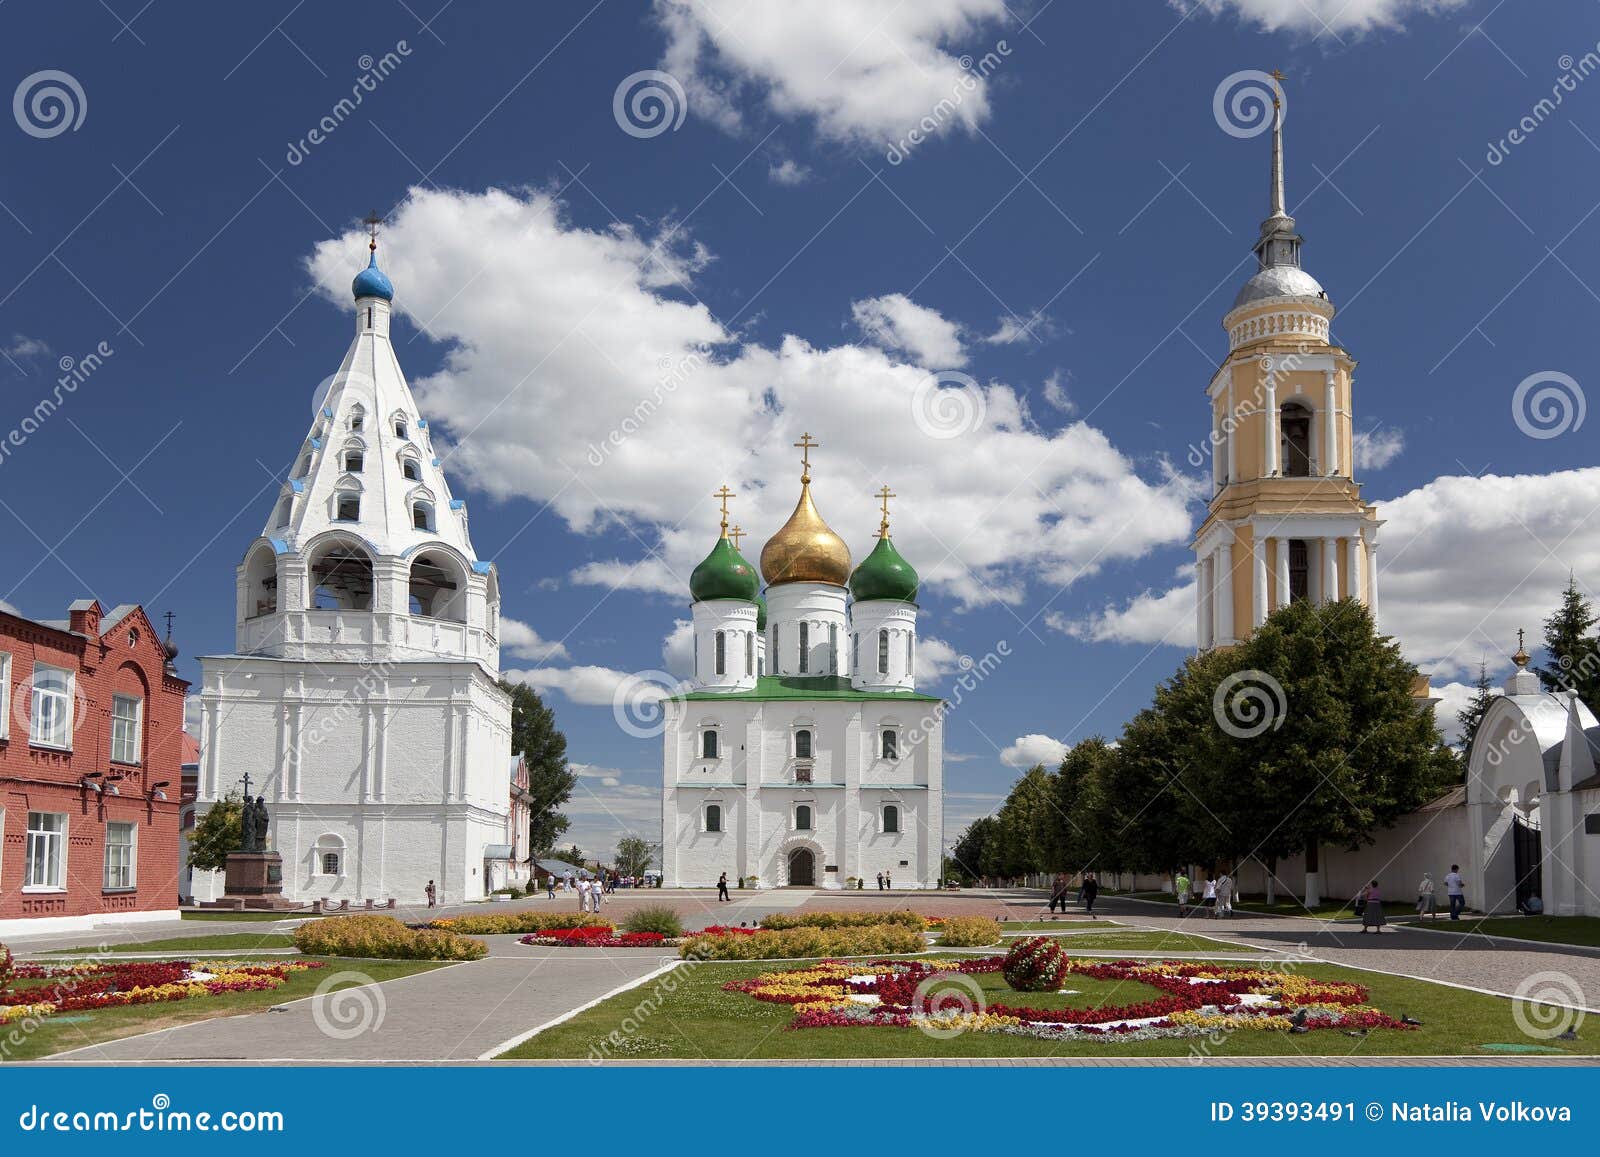 The Ensemble Of The Buildings Of The Cathedral Square In Kolomna